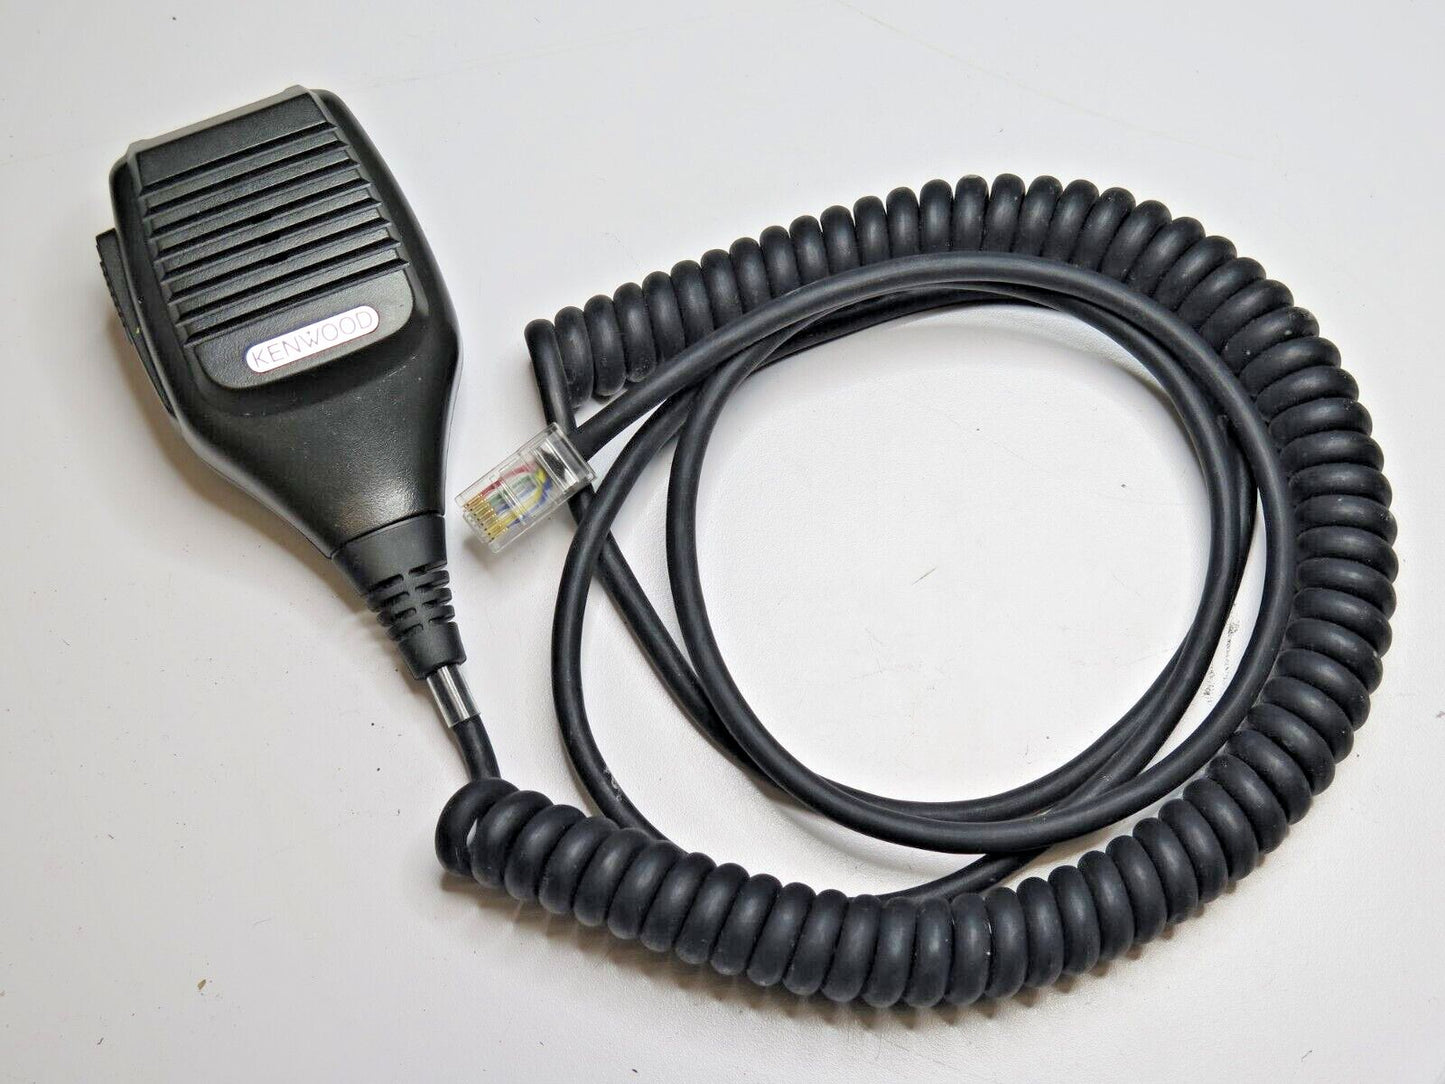 Kenwood Dynamic Microphone Impedance 600 OHM with Cord